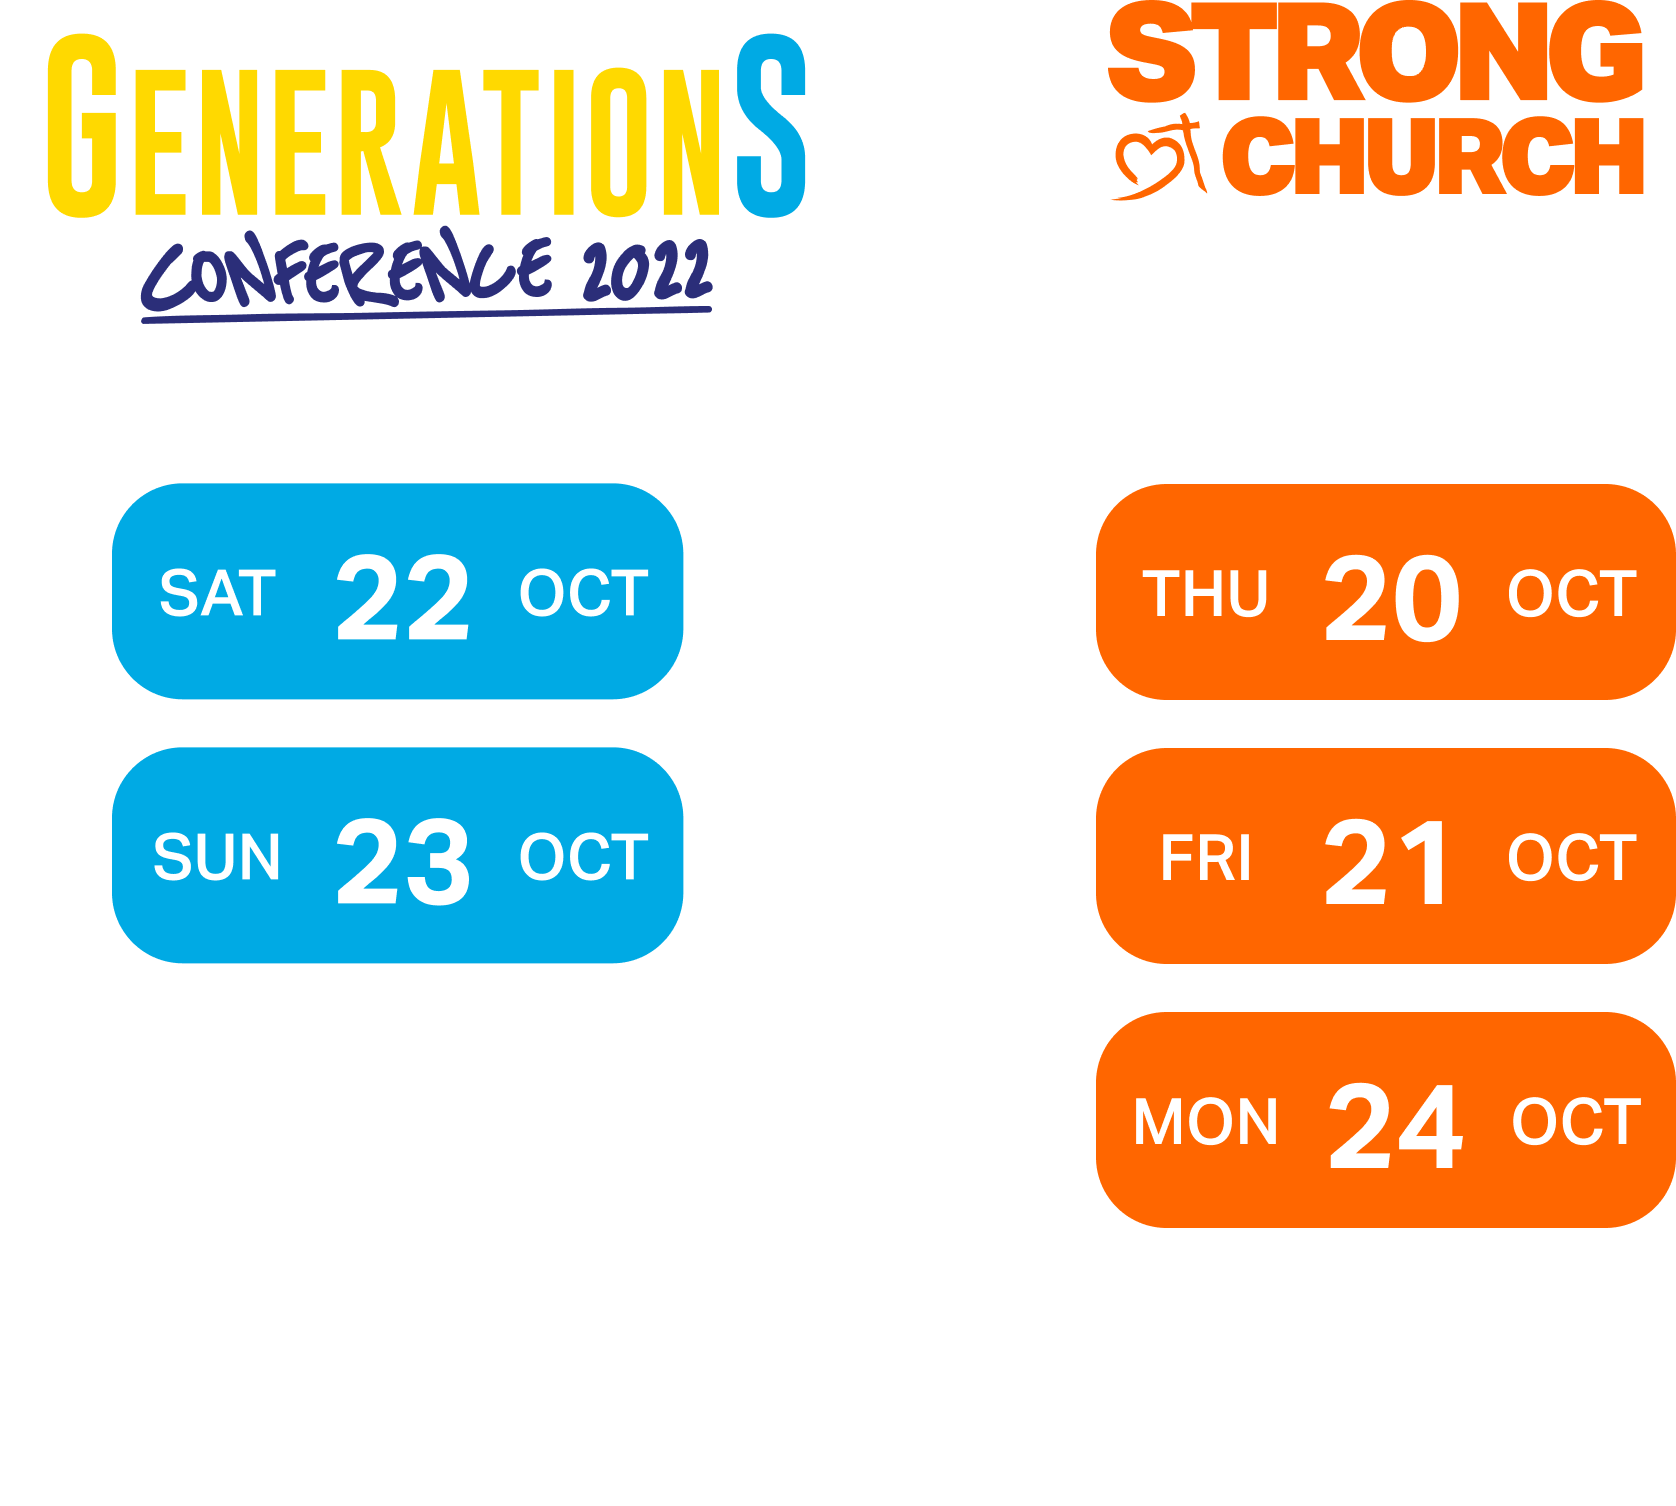 Dates for GenerationS Conference 2022 & Strong Church Summit 2022